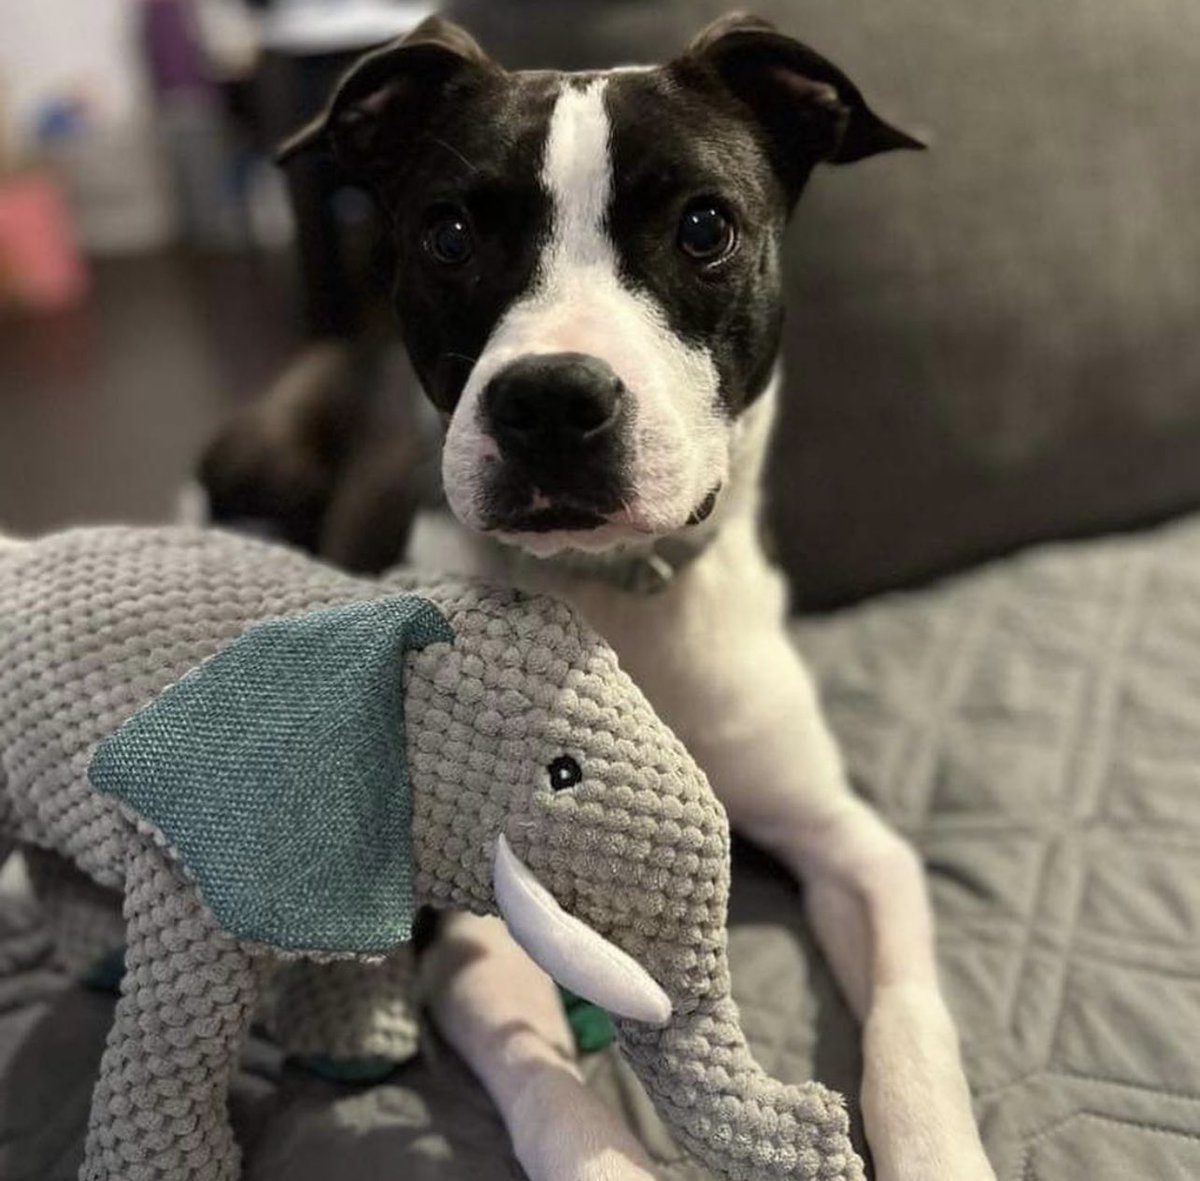 Our little 1-year-old Leroy wants to remind the world just how adorable and perfect he is.🧸 This shy but friendly boy is still looking for a forever home! To learn more about Leroy or adopt him please go to nycscr.org/adopt #BecauseTheyMatter #animalrescue